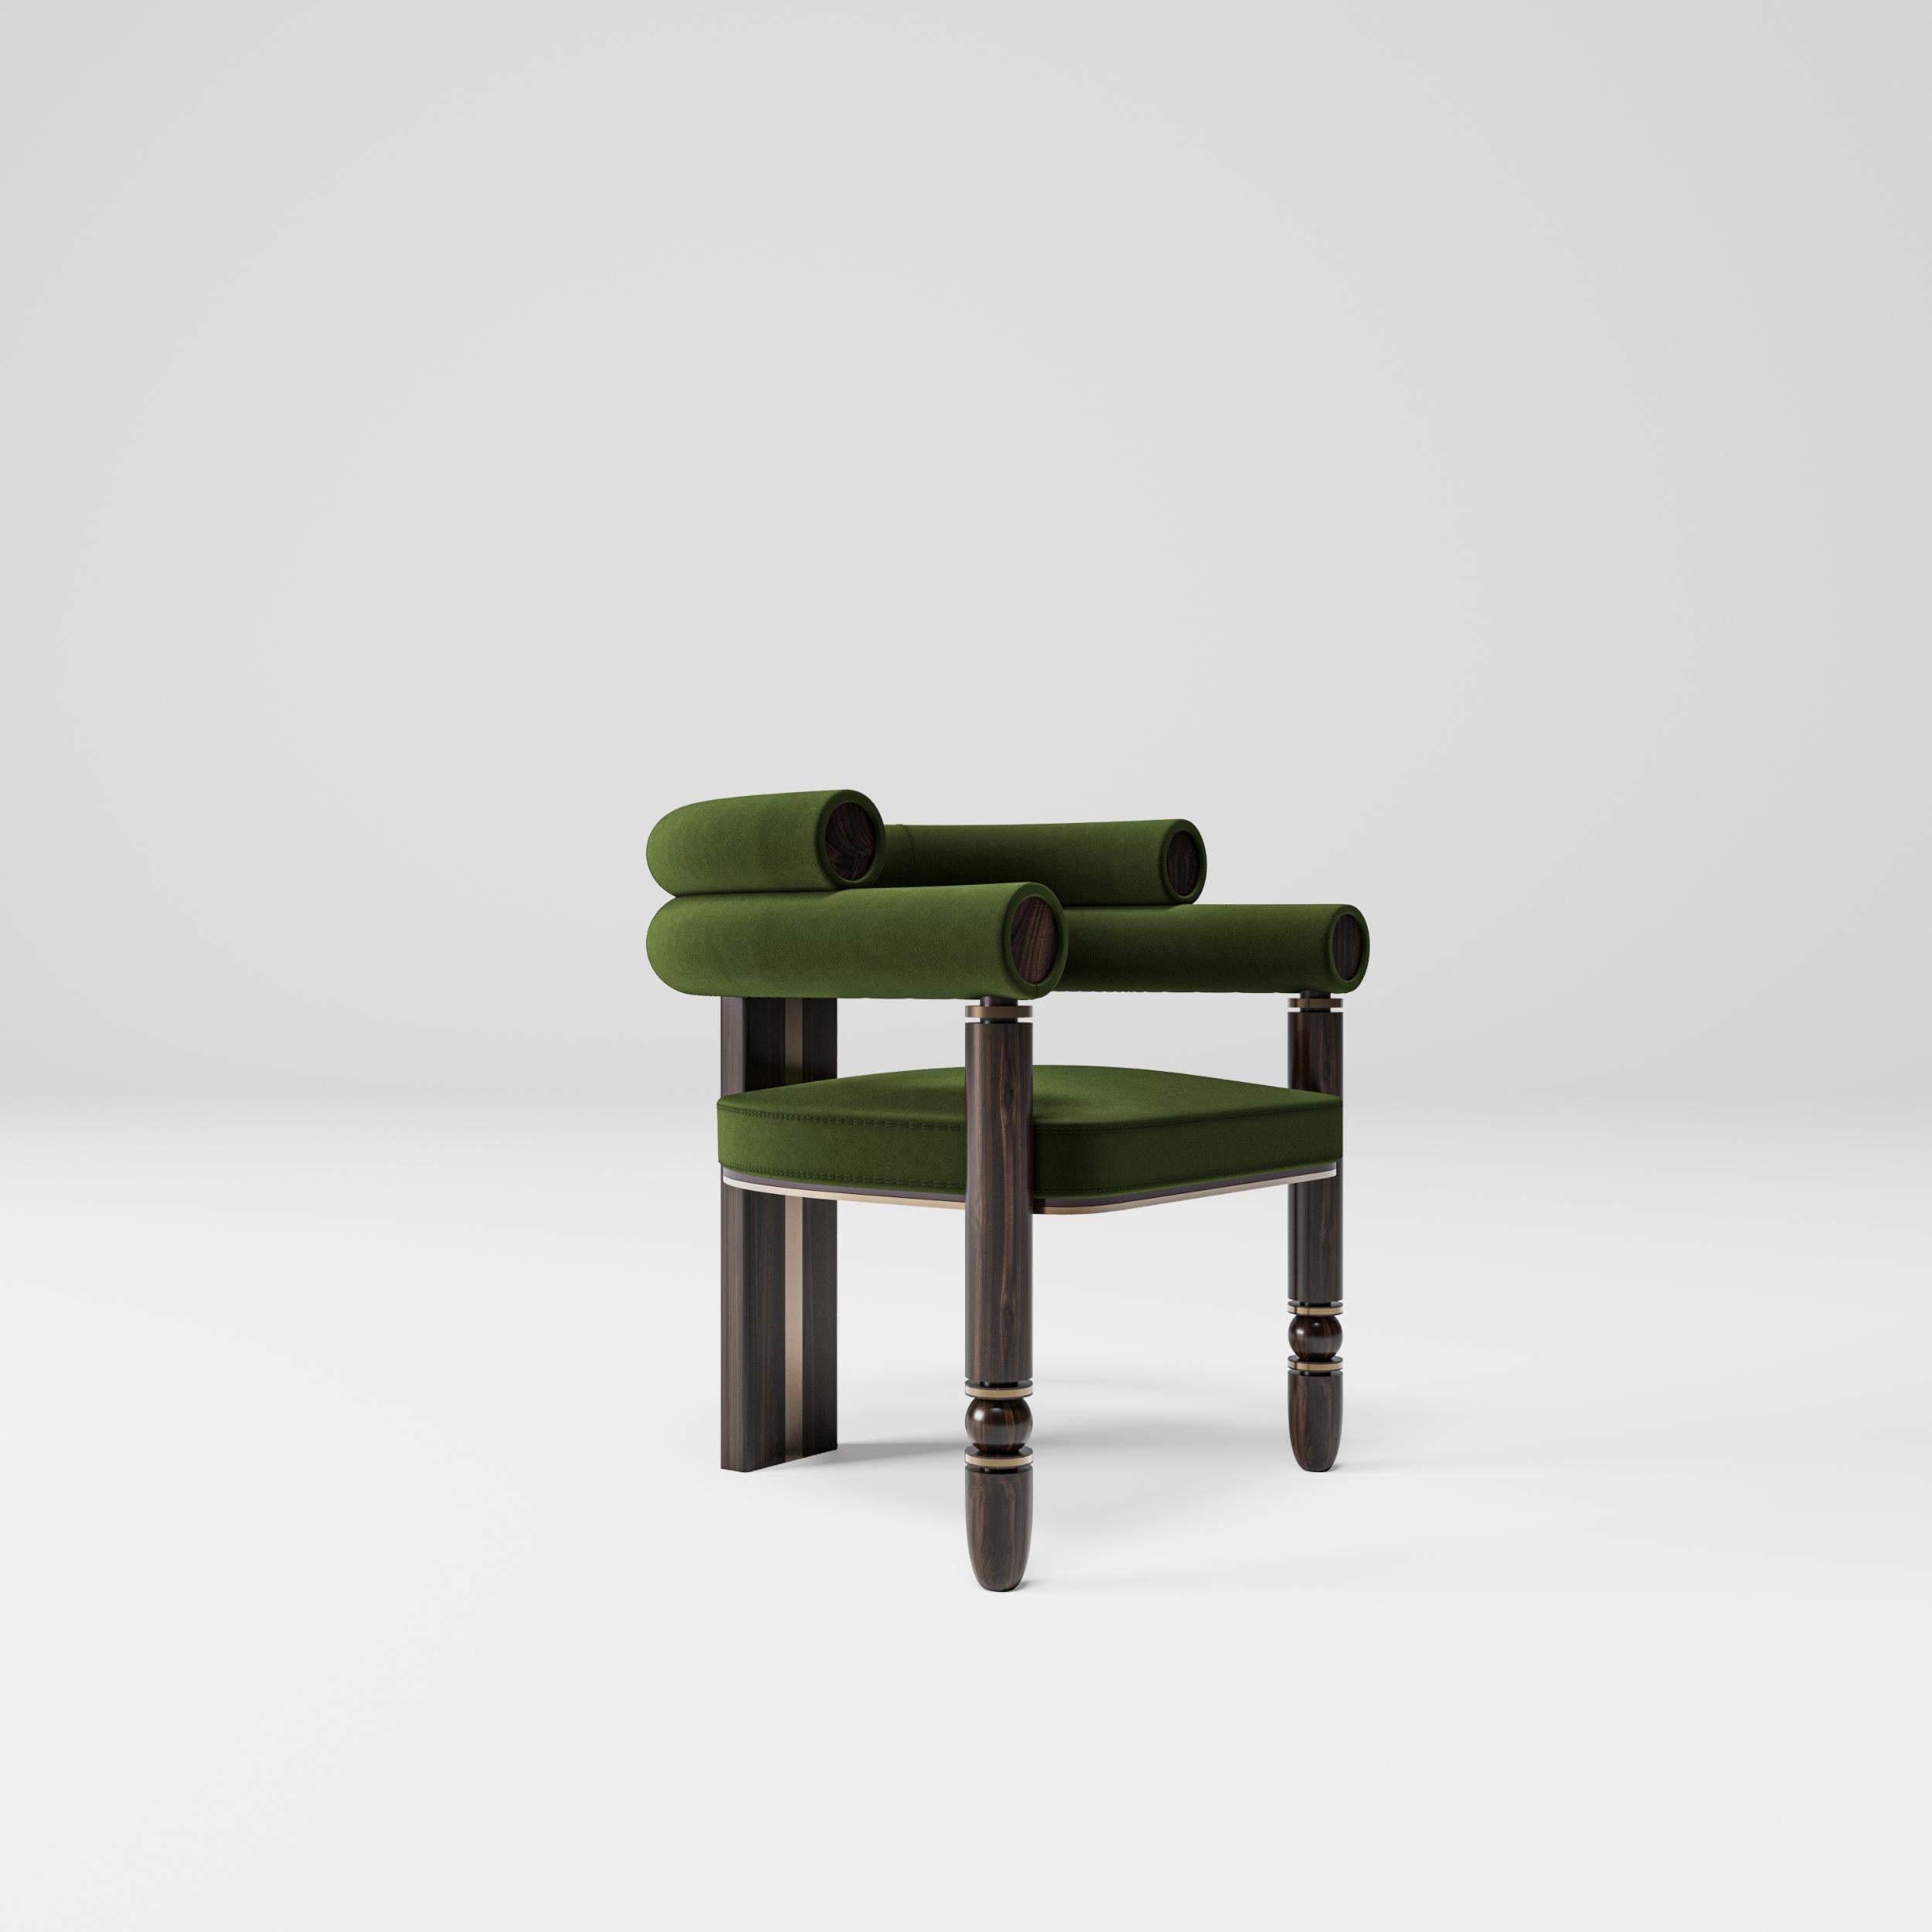 Anatolian chair

Taking its flamboyant and sociable attitude from the color of brass, and its naive and shy attitude from chestnut wood, the Anatolian chair transforms into a Mid-Century style with its green velvet upholstery. Designer Mehmet